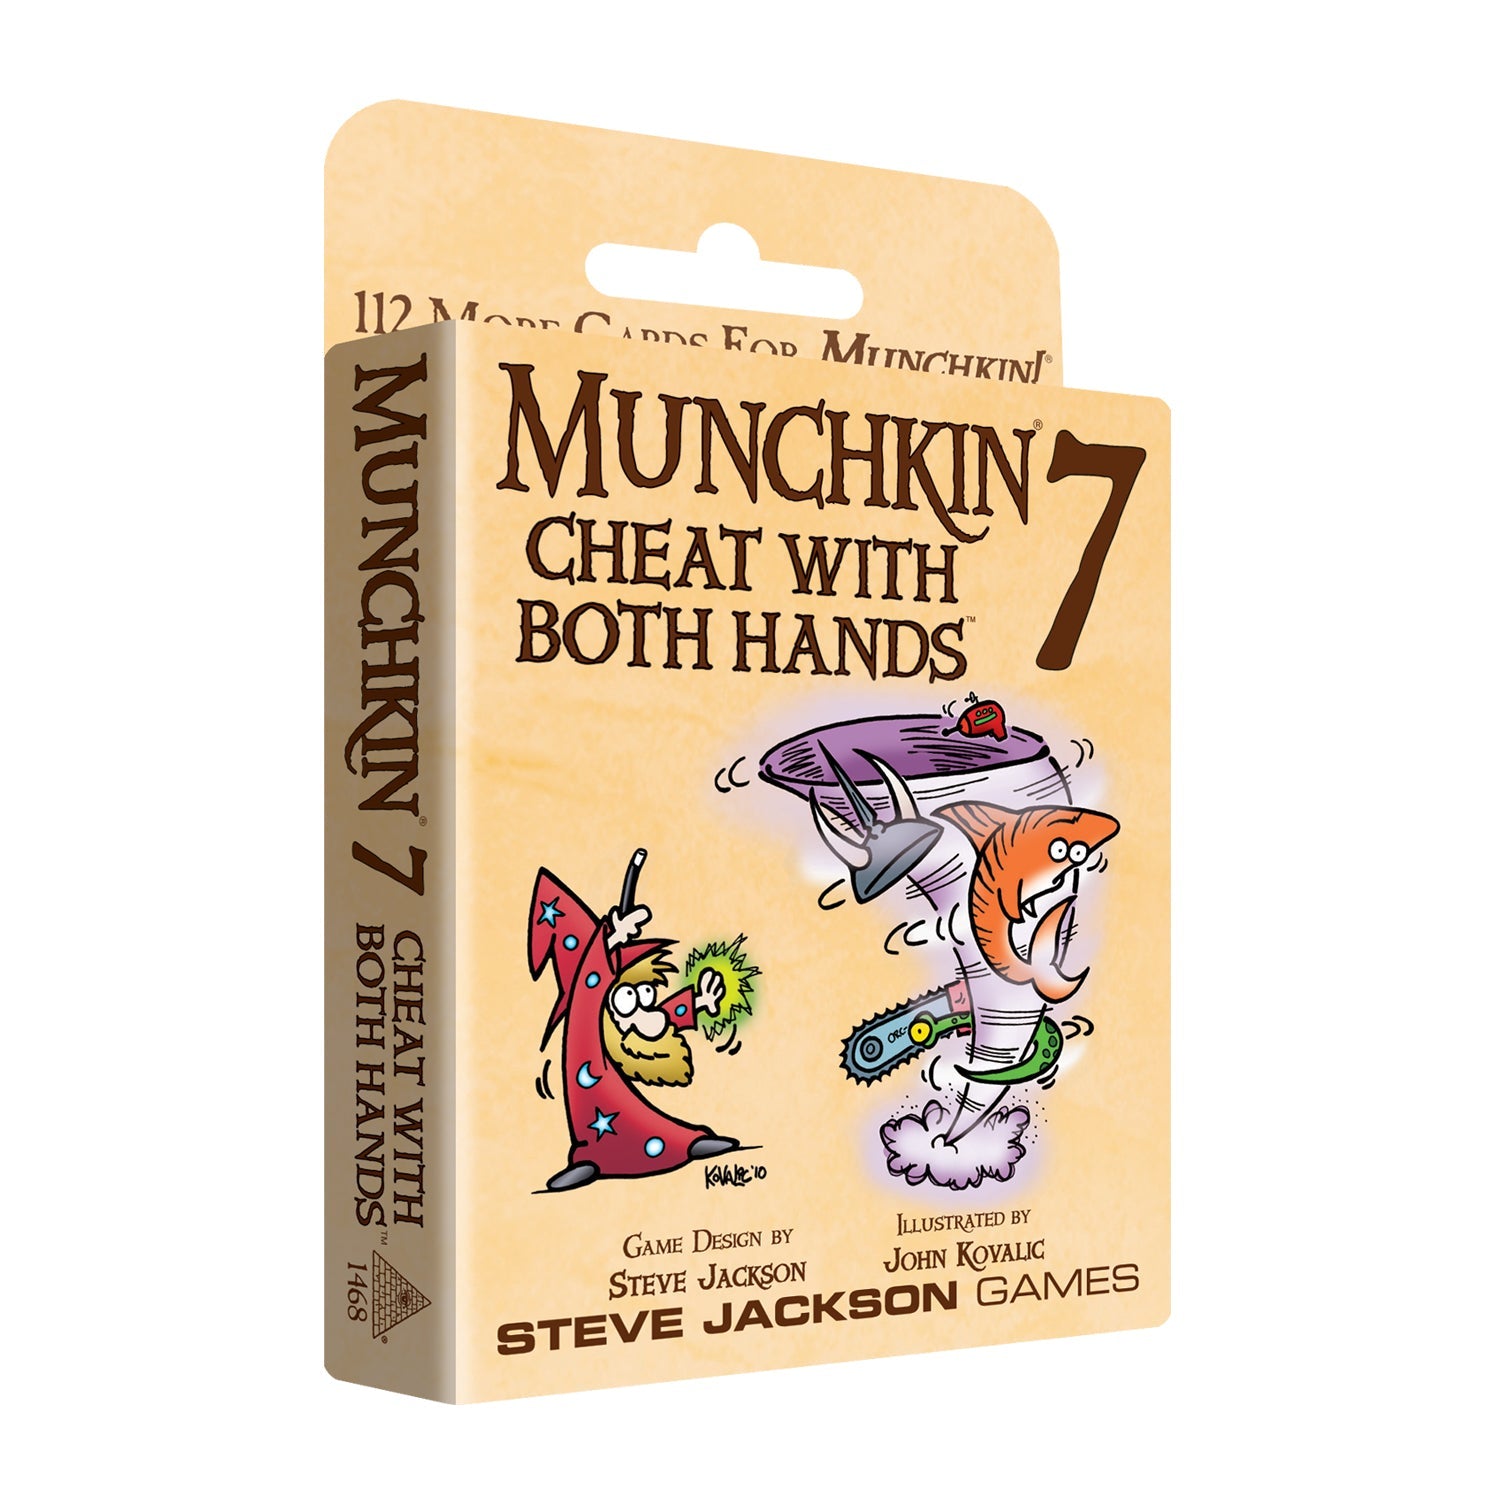 Munchkin 7 - Cheat With Both Hands Card Games Steve Jackson Games 